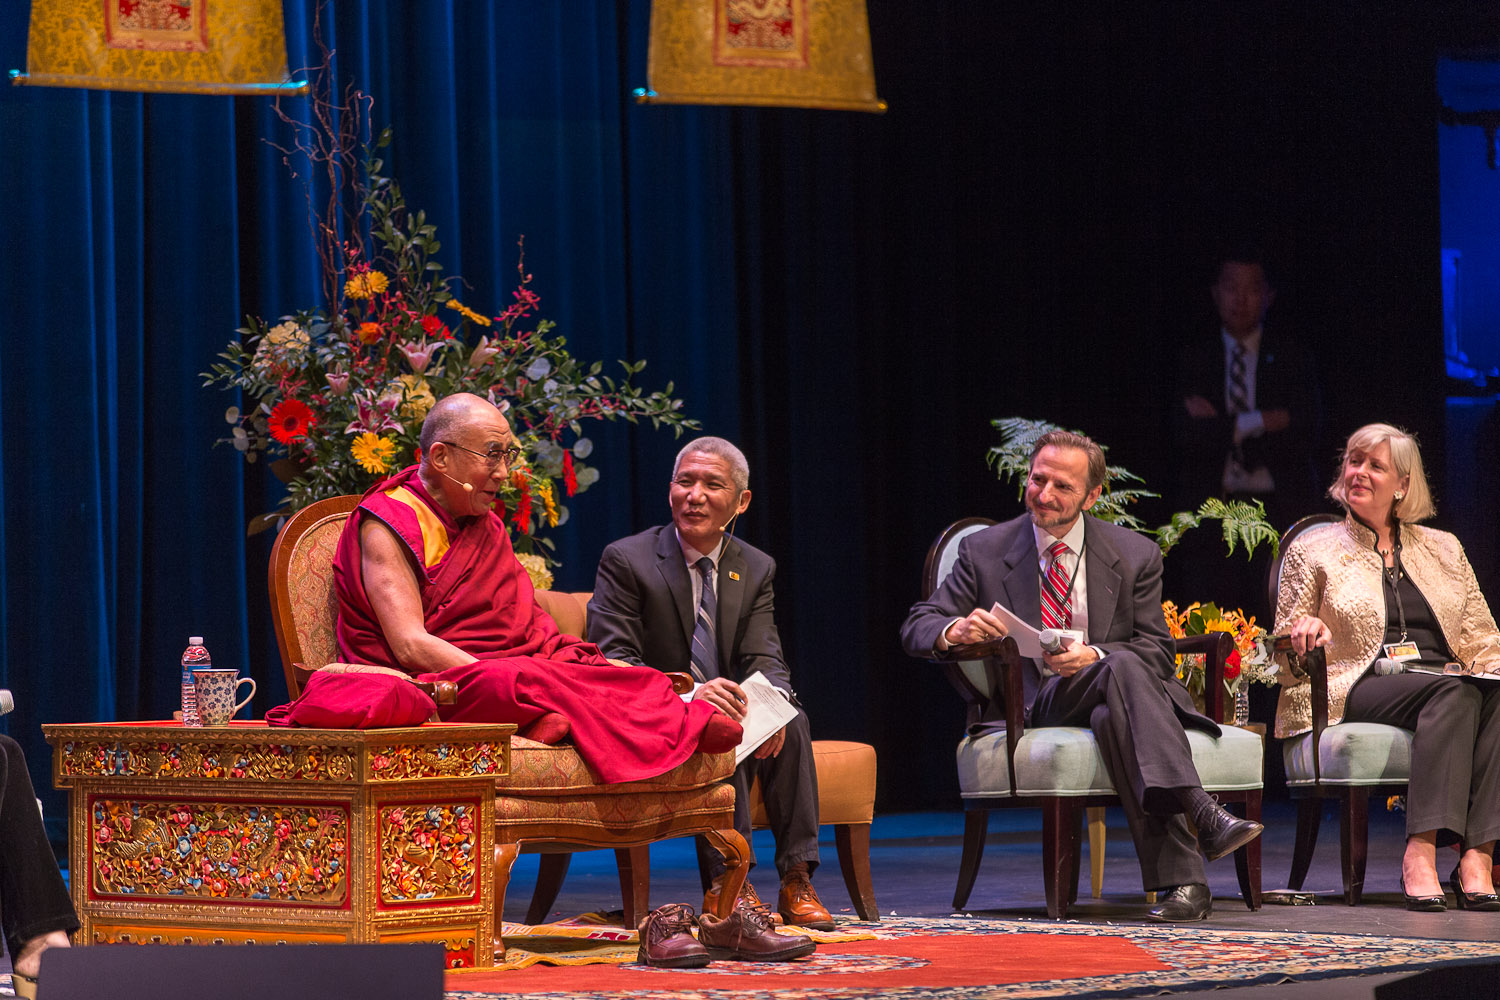 The Dalai Lama  sitting on stage with other panelists during a discussion